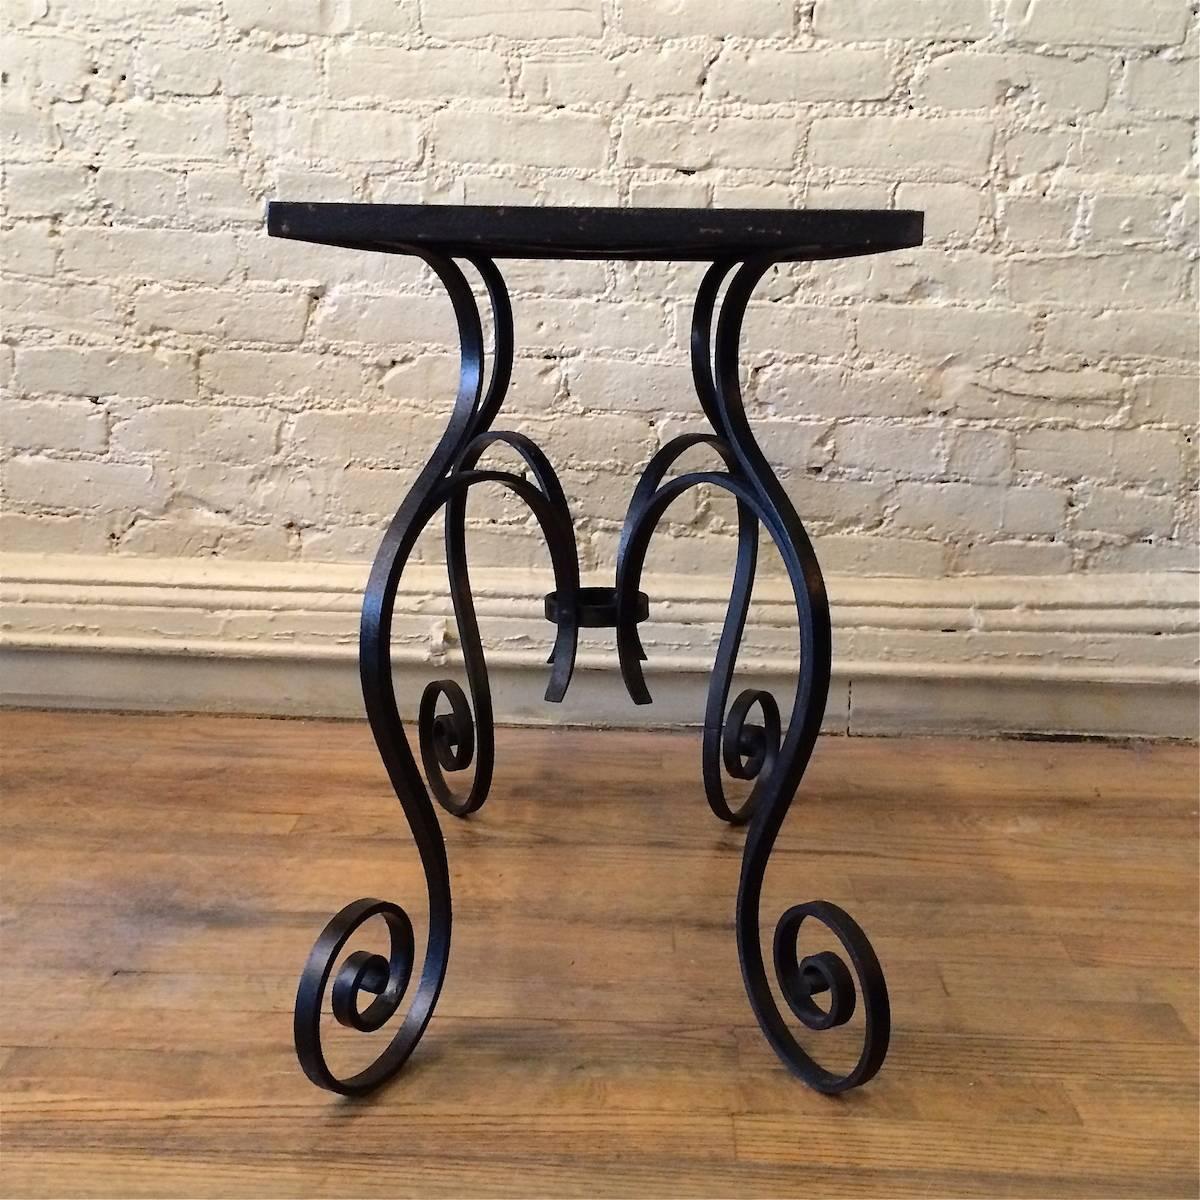 Mid-20th Century Hollywood Regency Scrolled Wrought Iron and Black Vitrolite Side Table